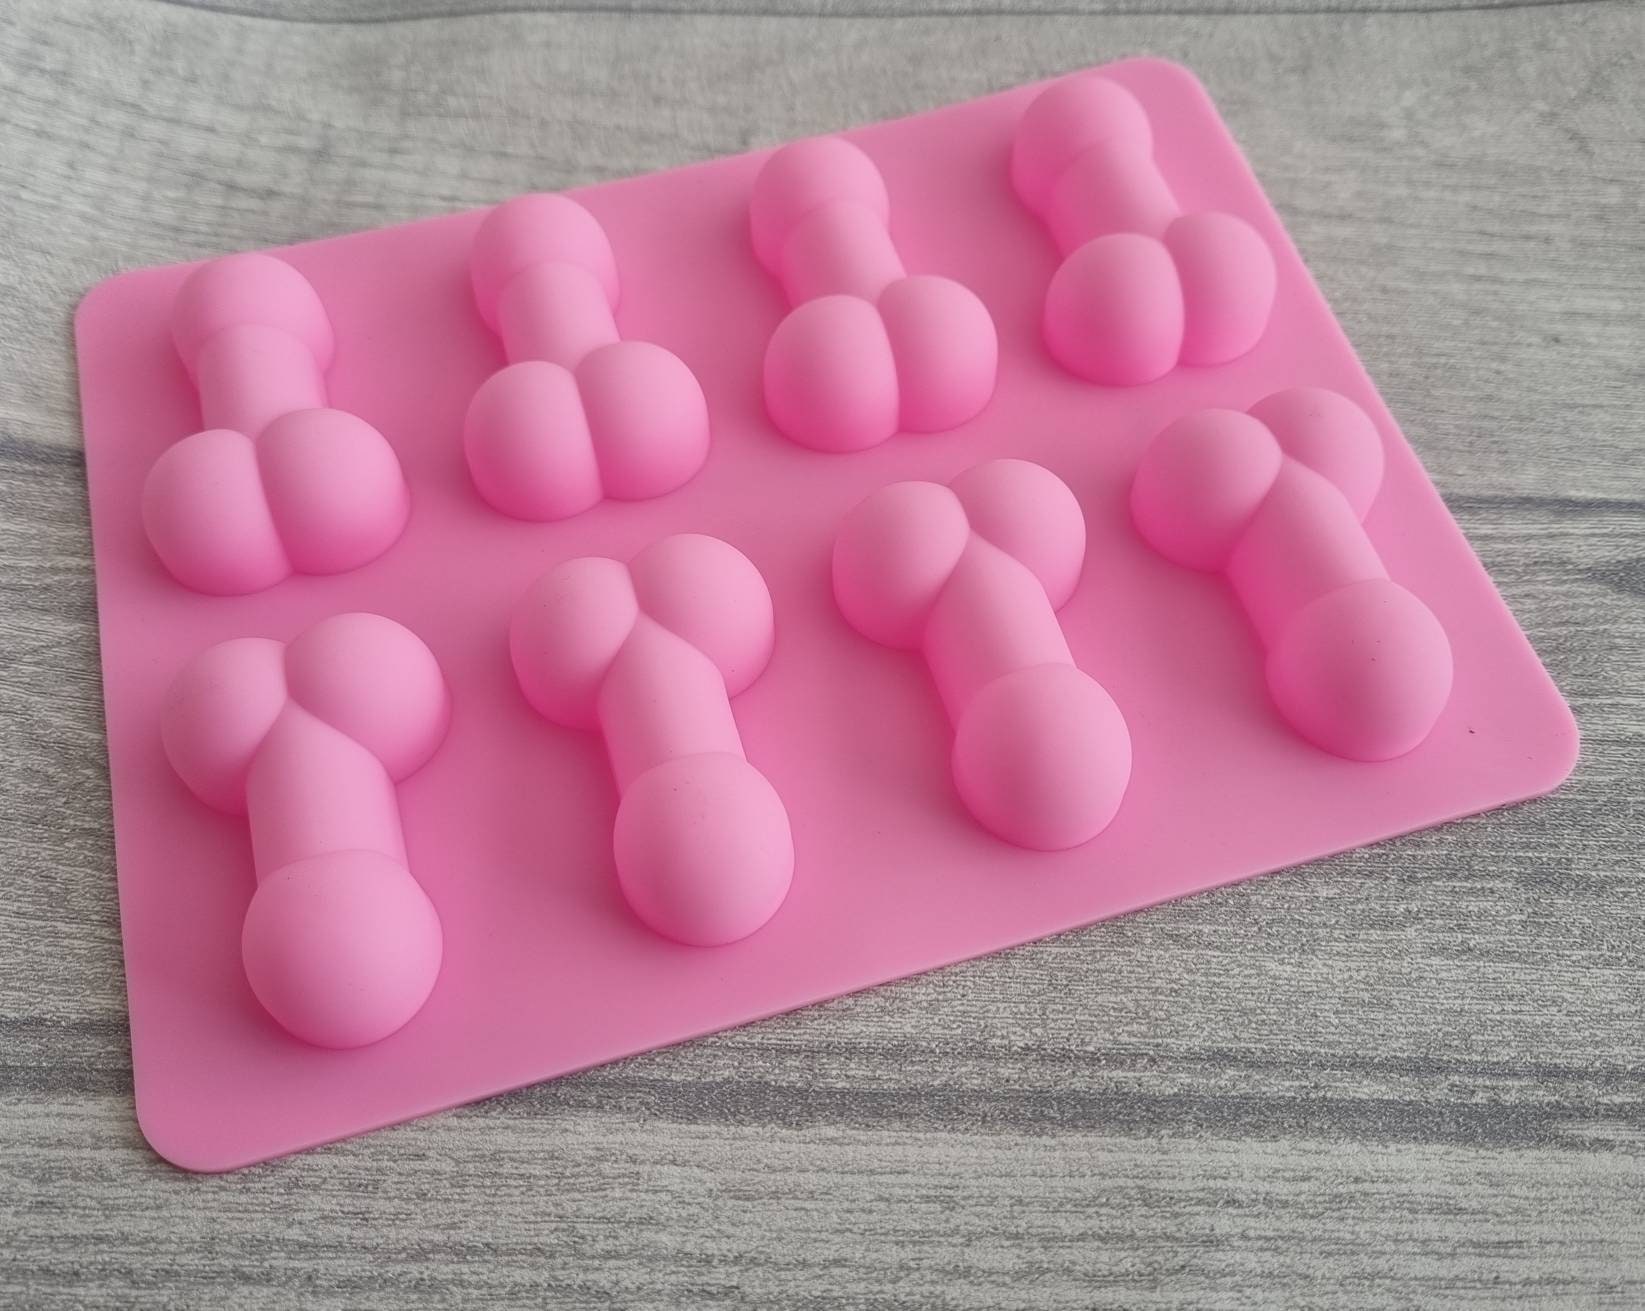 Penis Mold, Dick Mold, Silicone Penis Mold Ice Cube Tray, Candle Mold,  Penis Chocolate Mold, Penis Jello Mold, Dick Jello Mold, Non Stick 